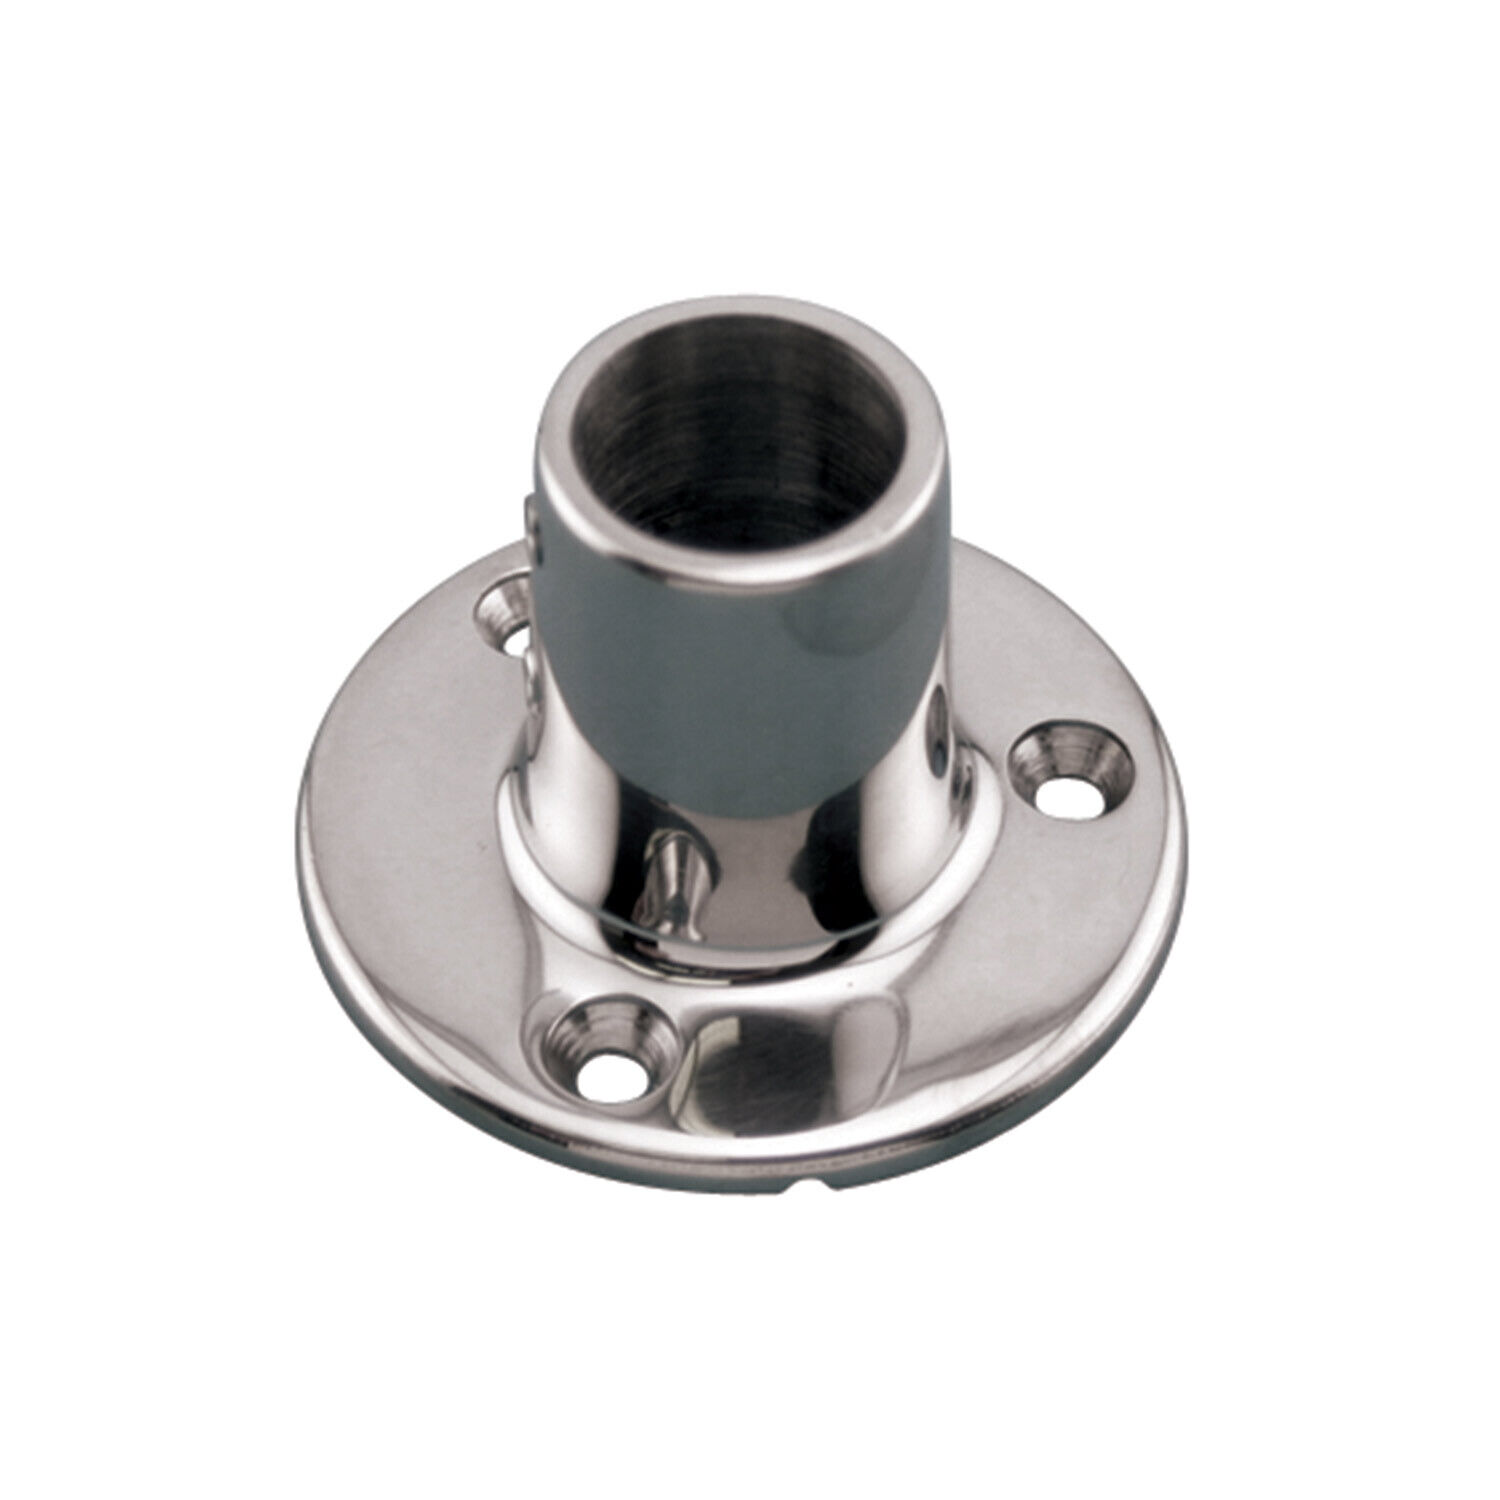 Boat Hand Rail Fitting-60/90Degree 1-1/4inch Regular Base-Marine 316 Stainless Steel usd by Boats & Awning 